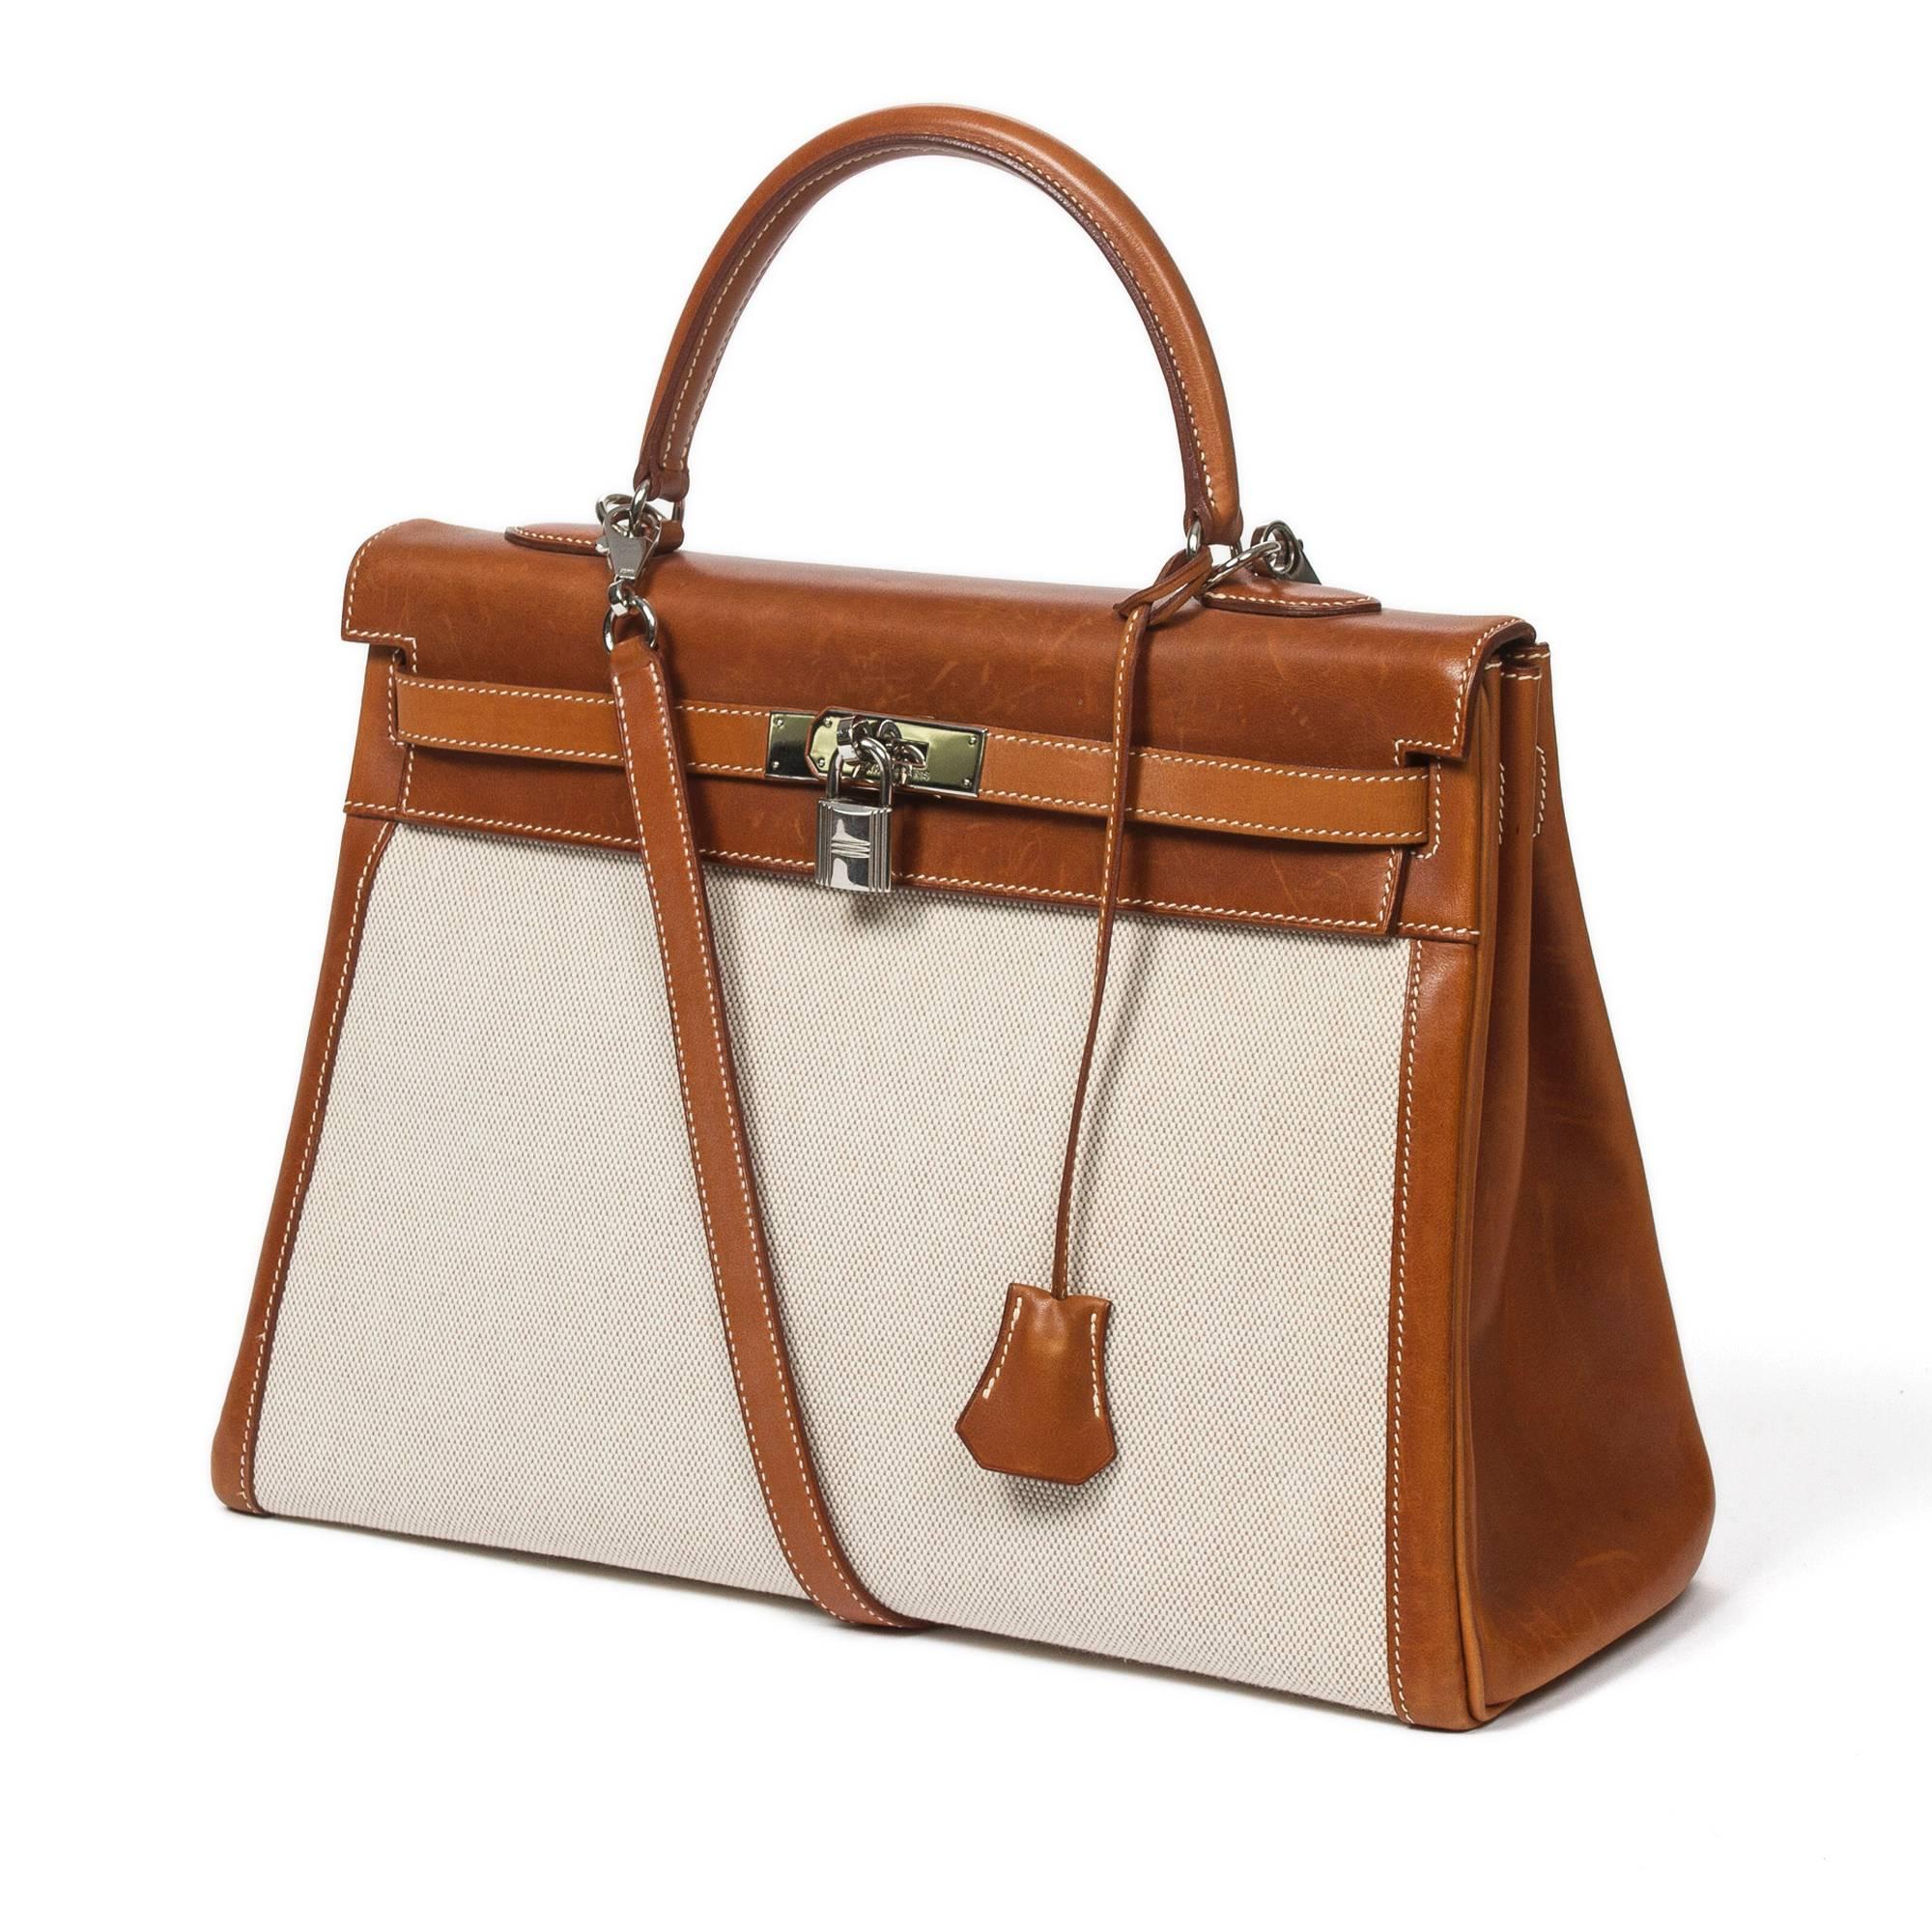 Kelly Retourné 35 in beige Toile H with Barenia leather handle, shoulder strap and accents, cadenas and keys in clochette, silver tone hardware. Interior lined in brown chèvre leather with 2 slip pockets and one zip pocket. Stamp E in square.